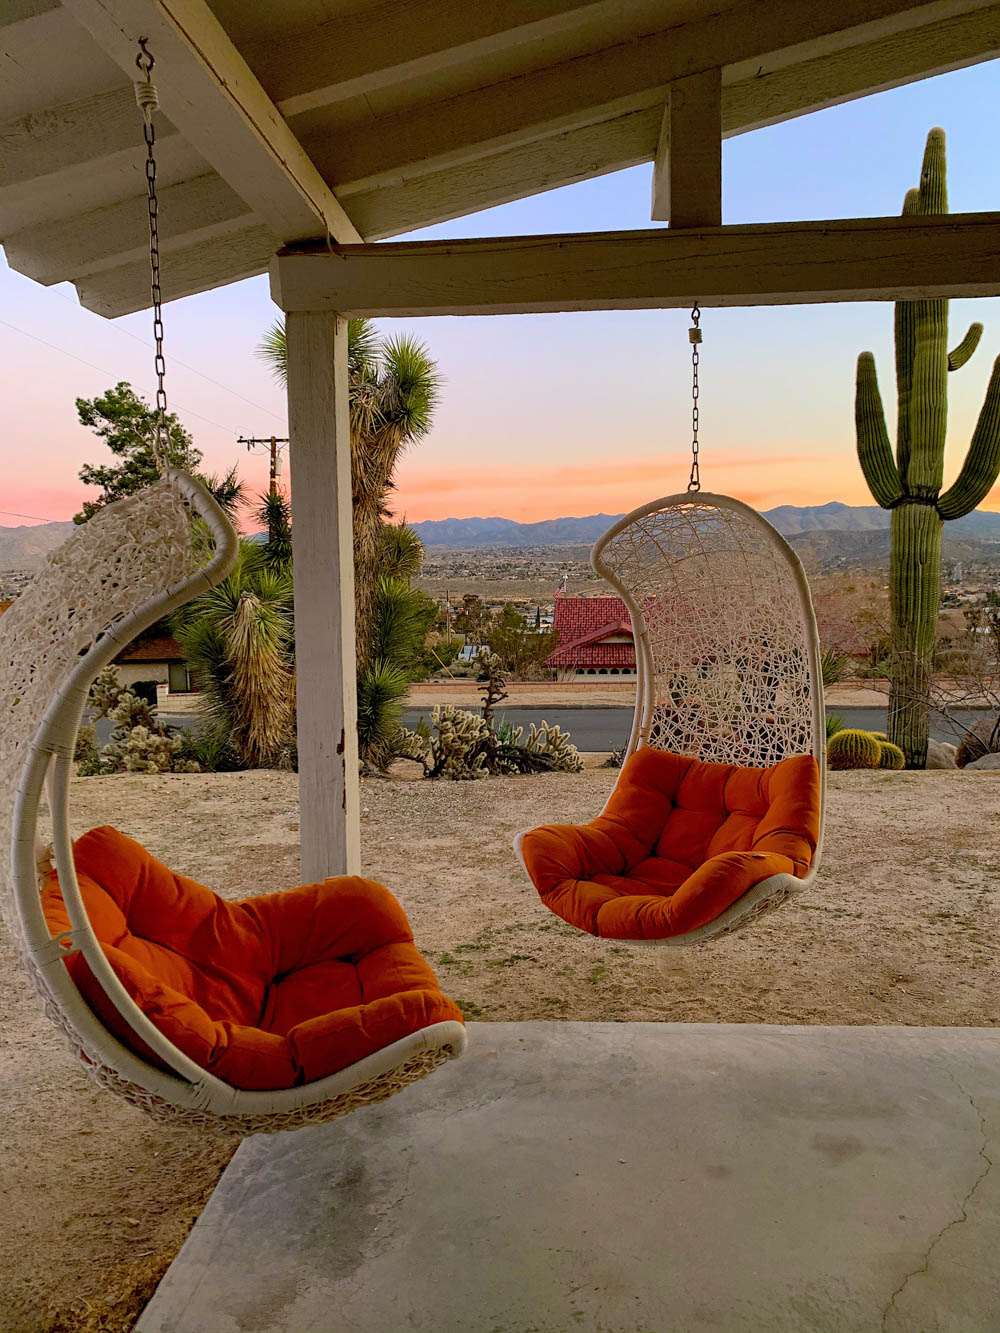 Where to Stay in Joshua Tree National Park - Roads and Destinations